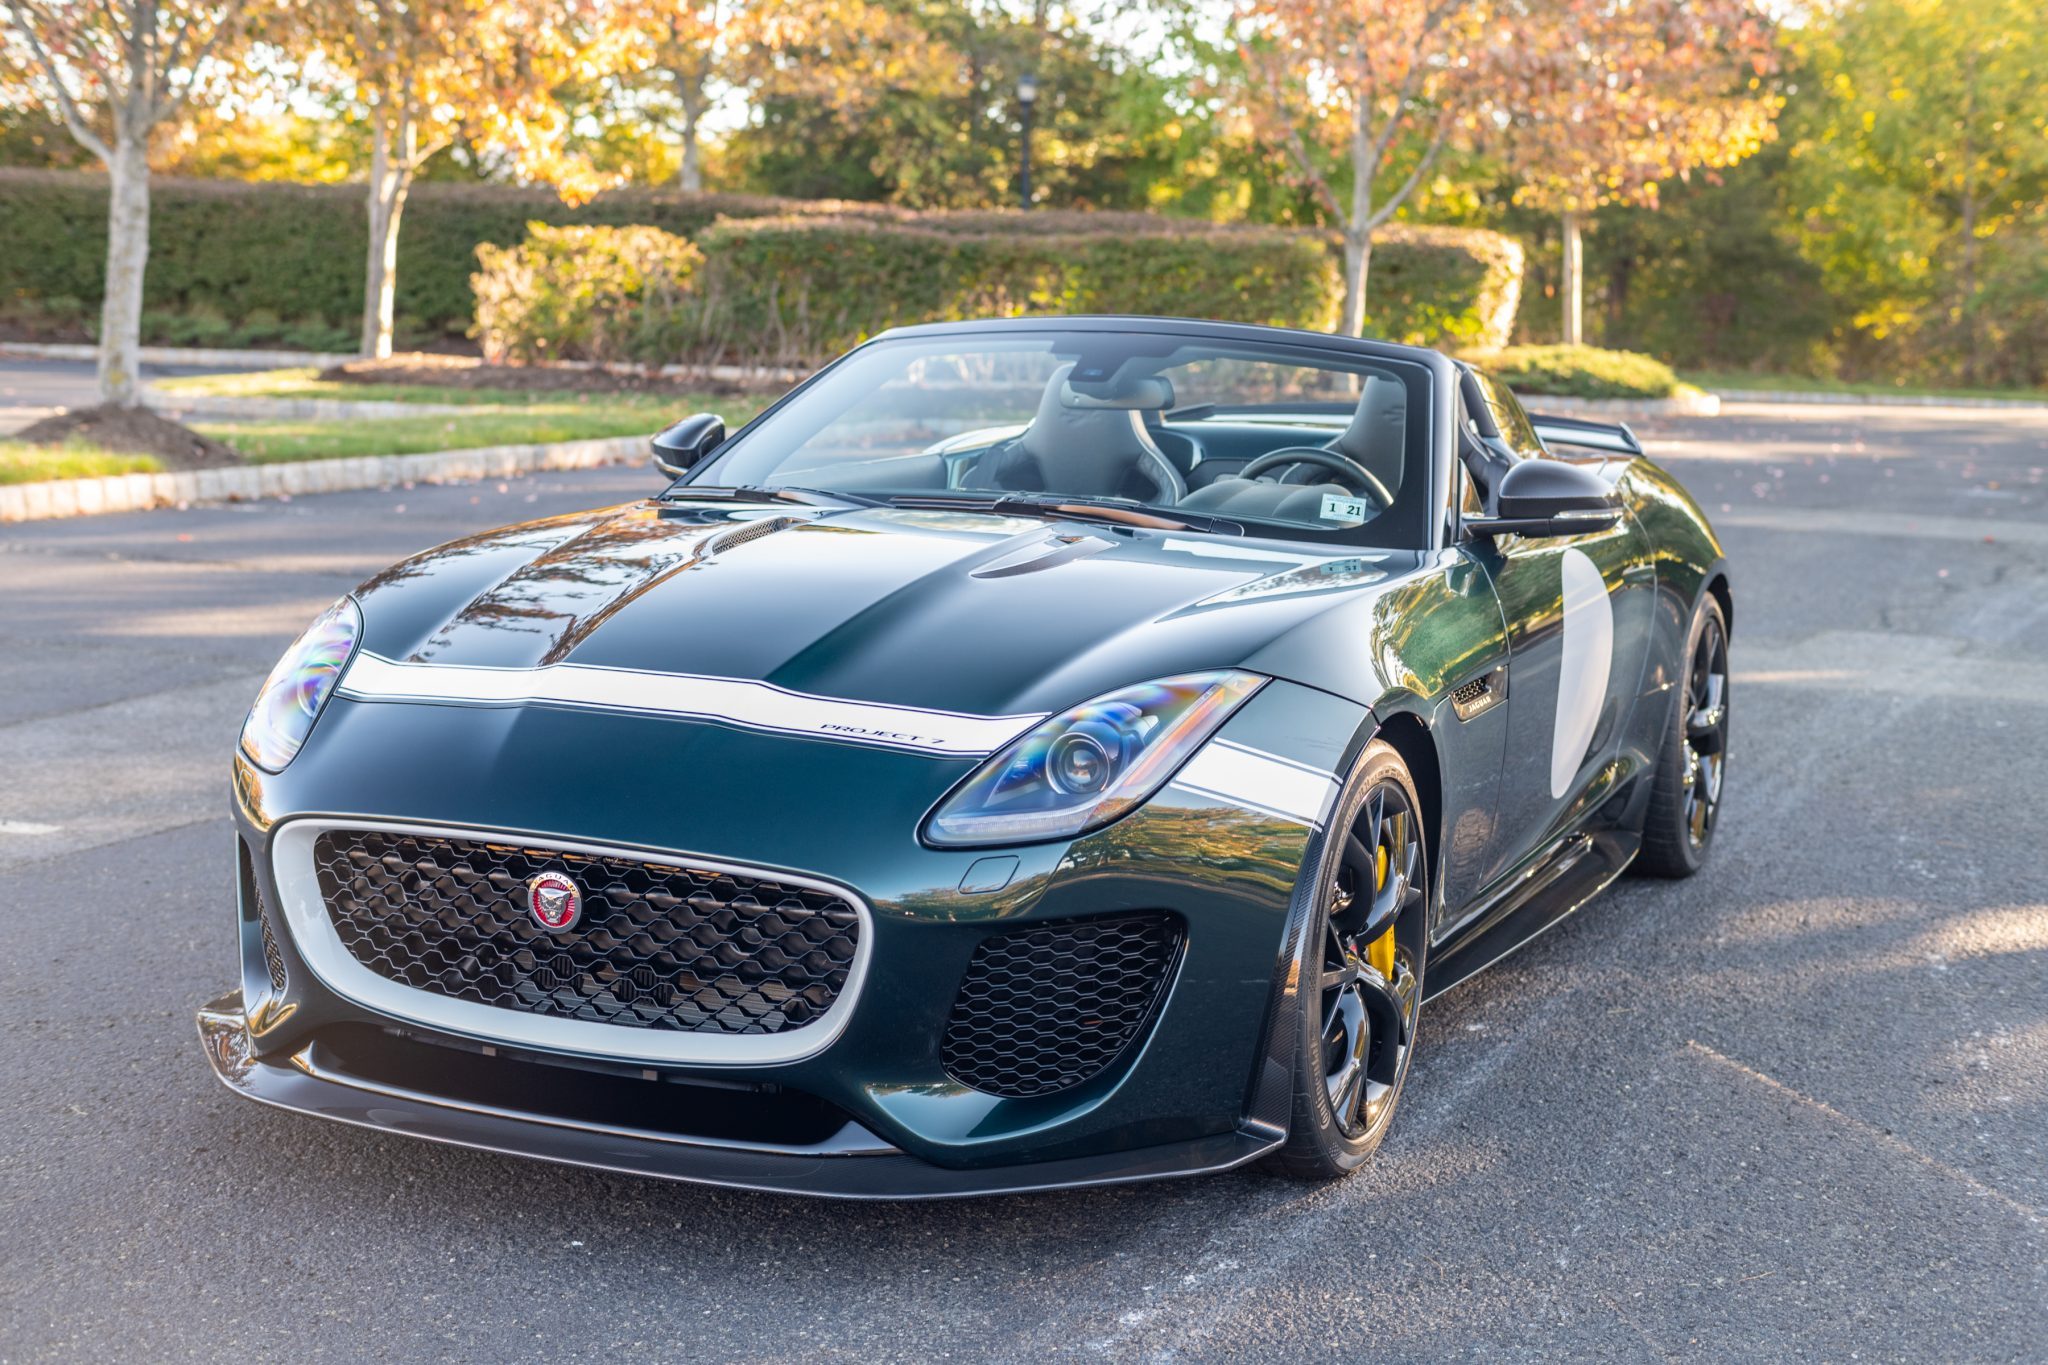 Cars Like The Jaguar F Type Project 7 Were Meant To Be Driven So Do This 900 Mile Example A Favor Carscoops